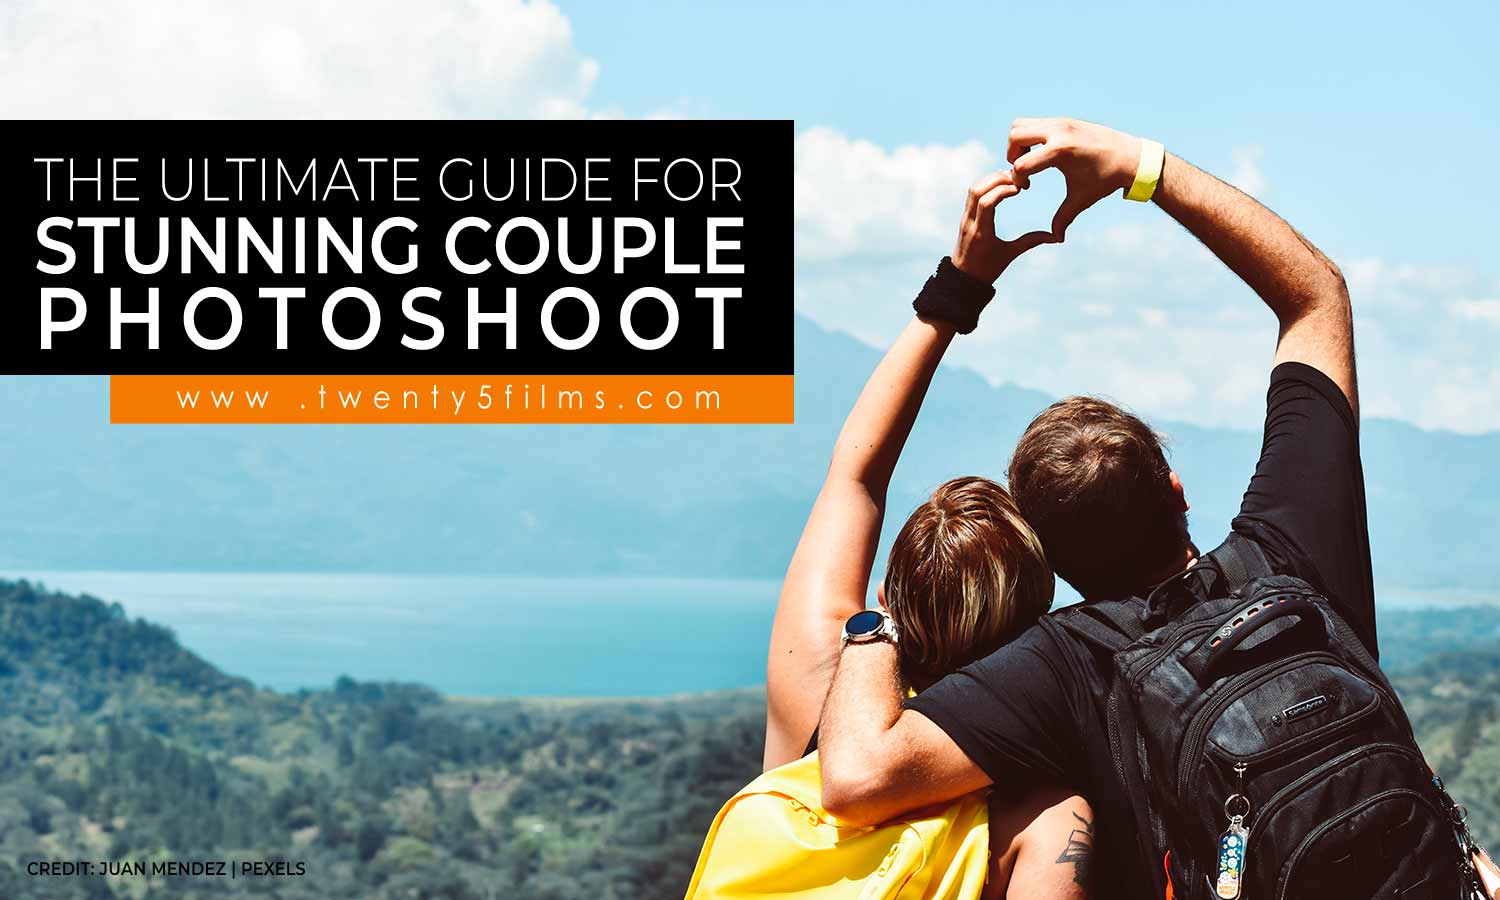 The Ultimate Guide for Stunning Couple Photoshoot